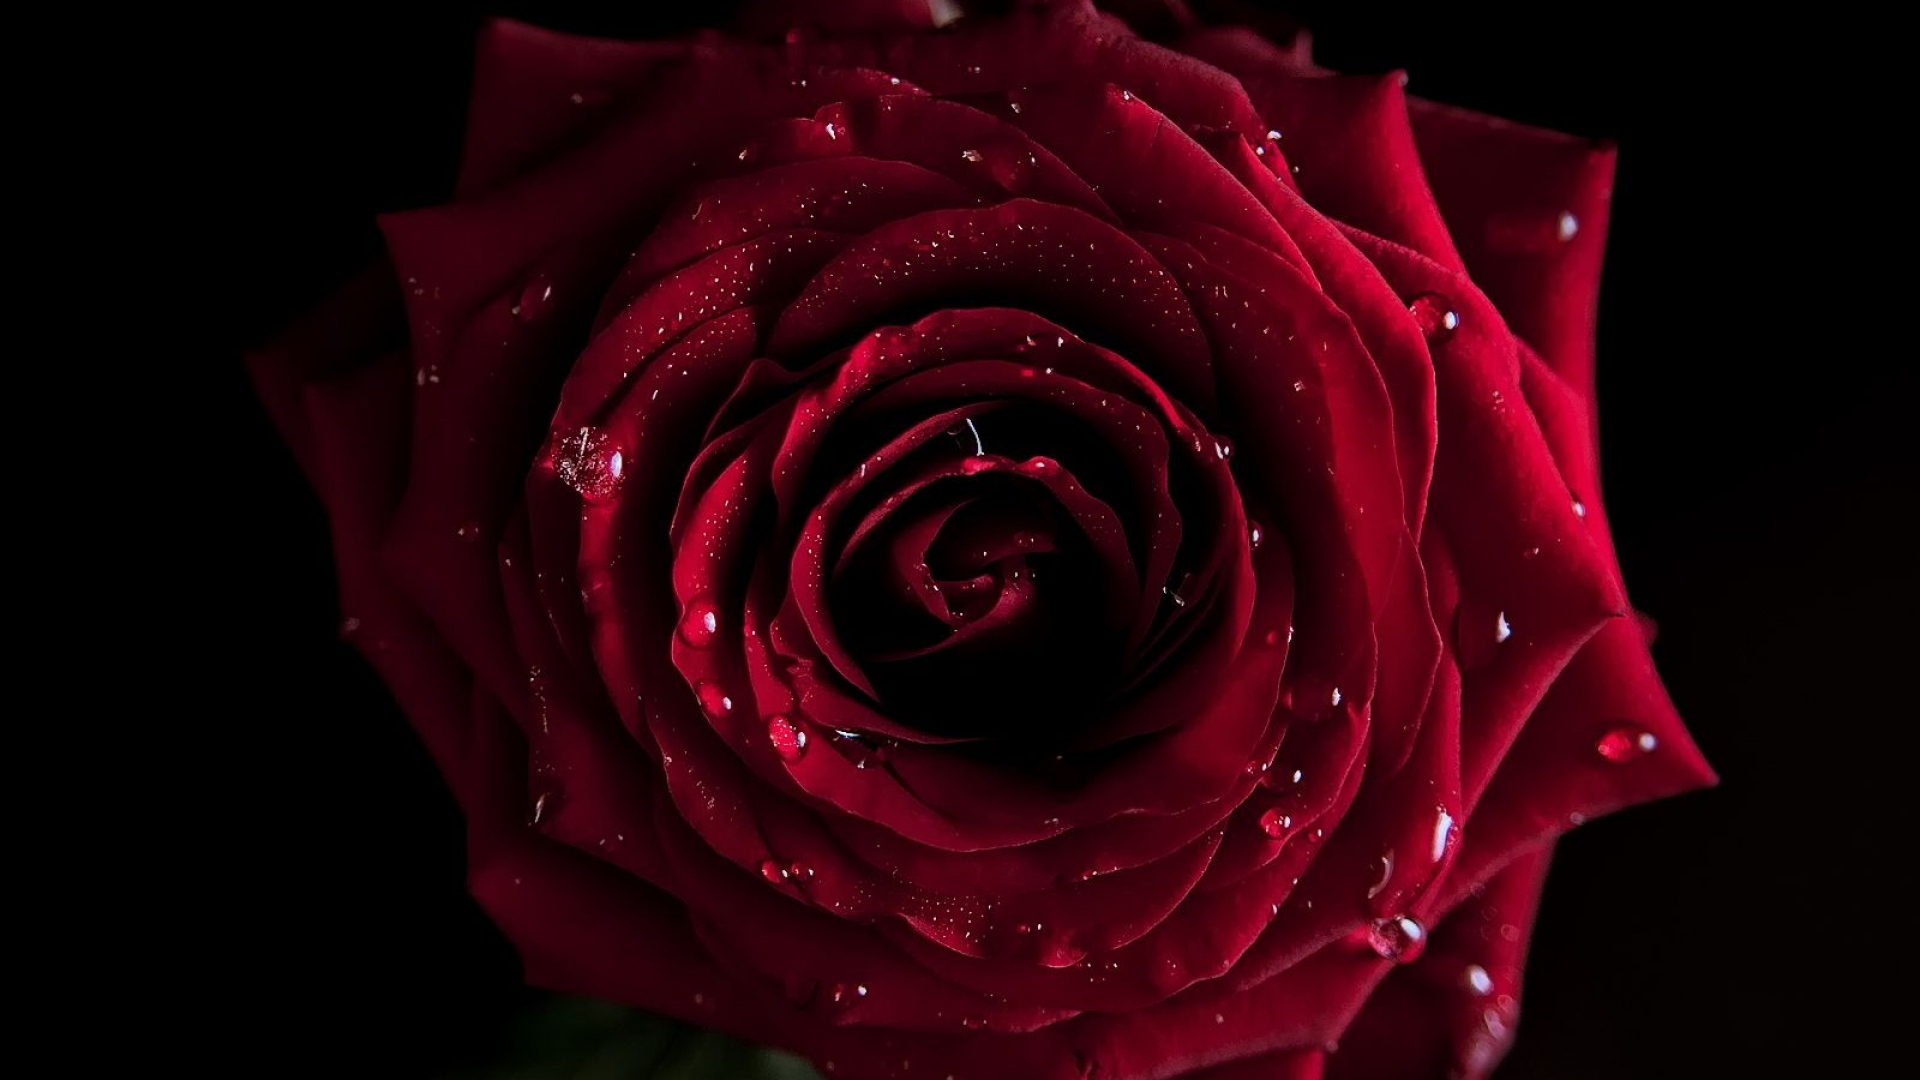 Red Roses Wallpapers HD A35